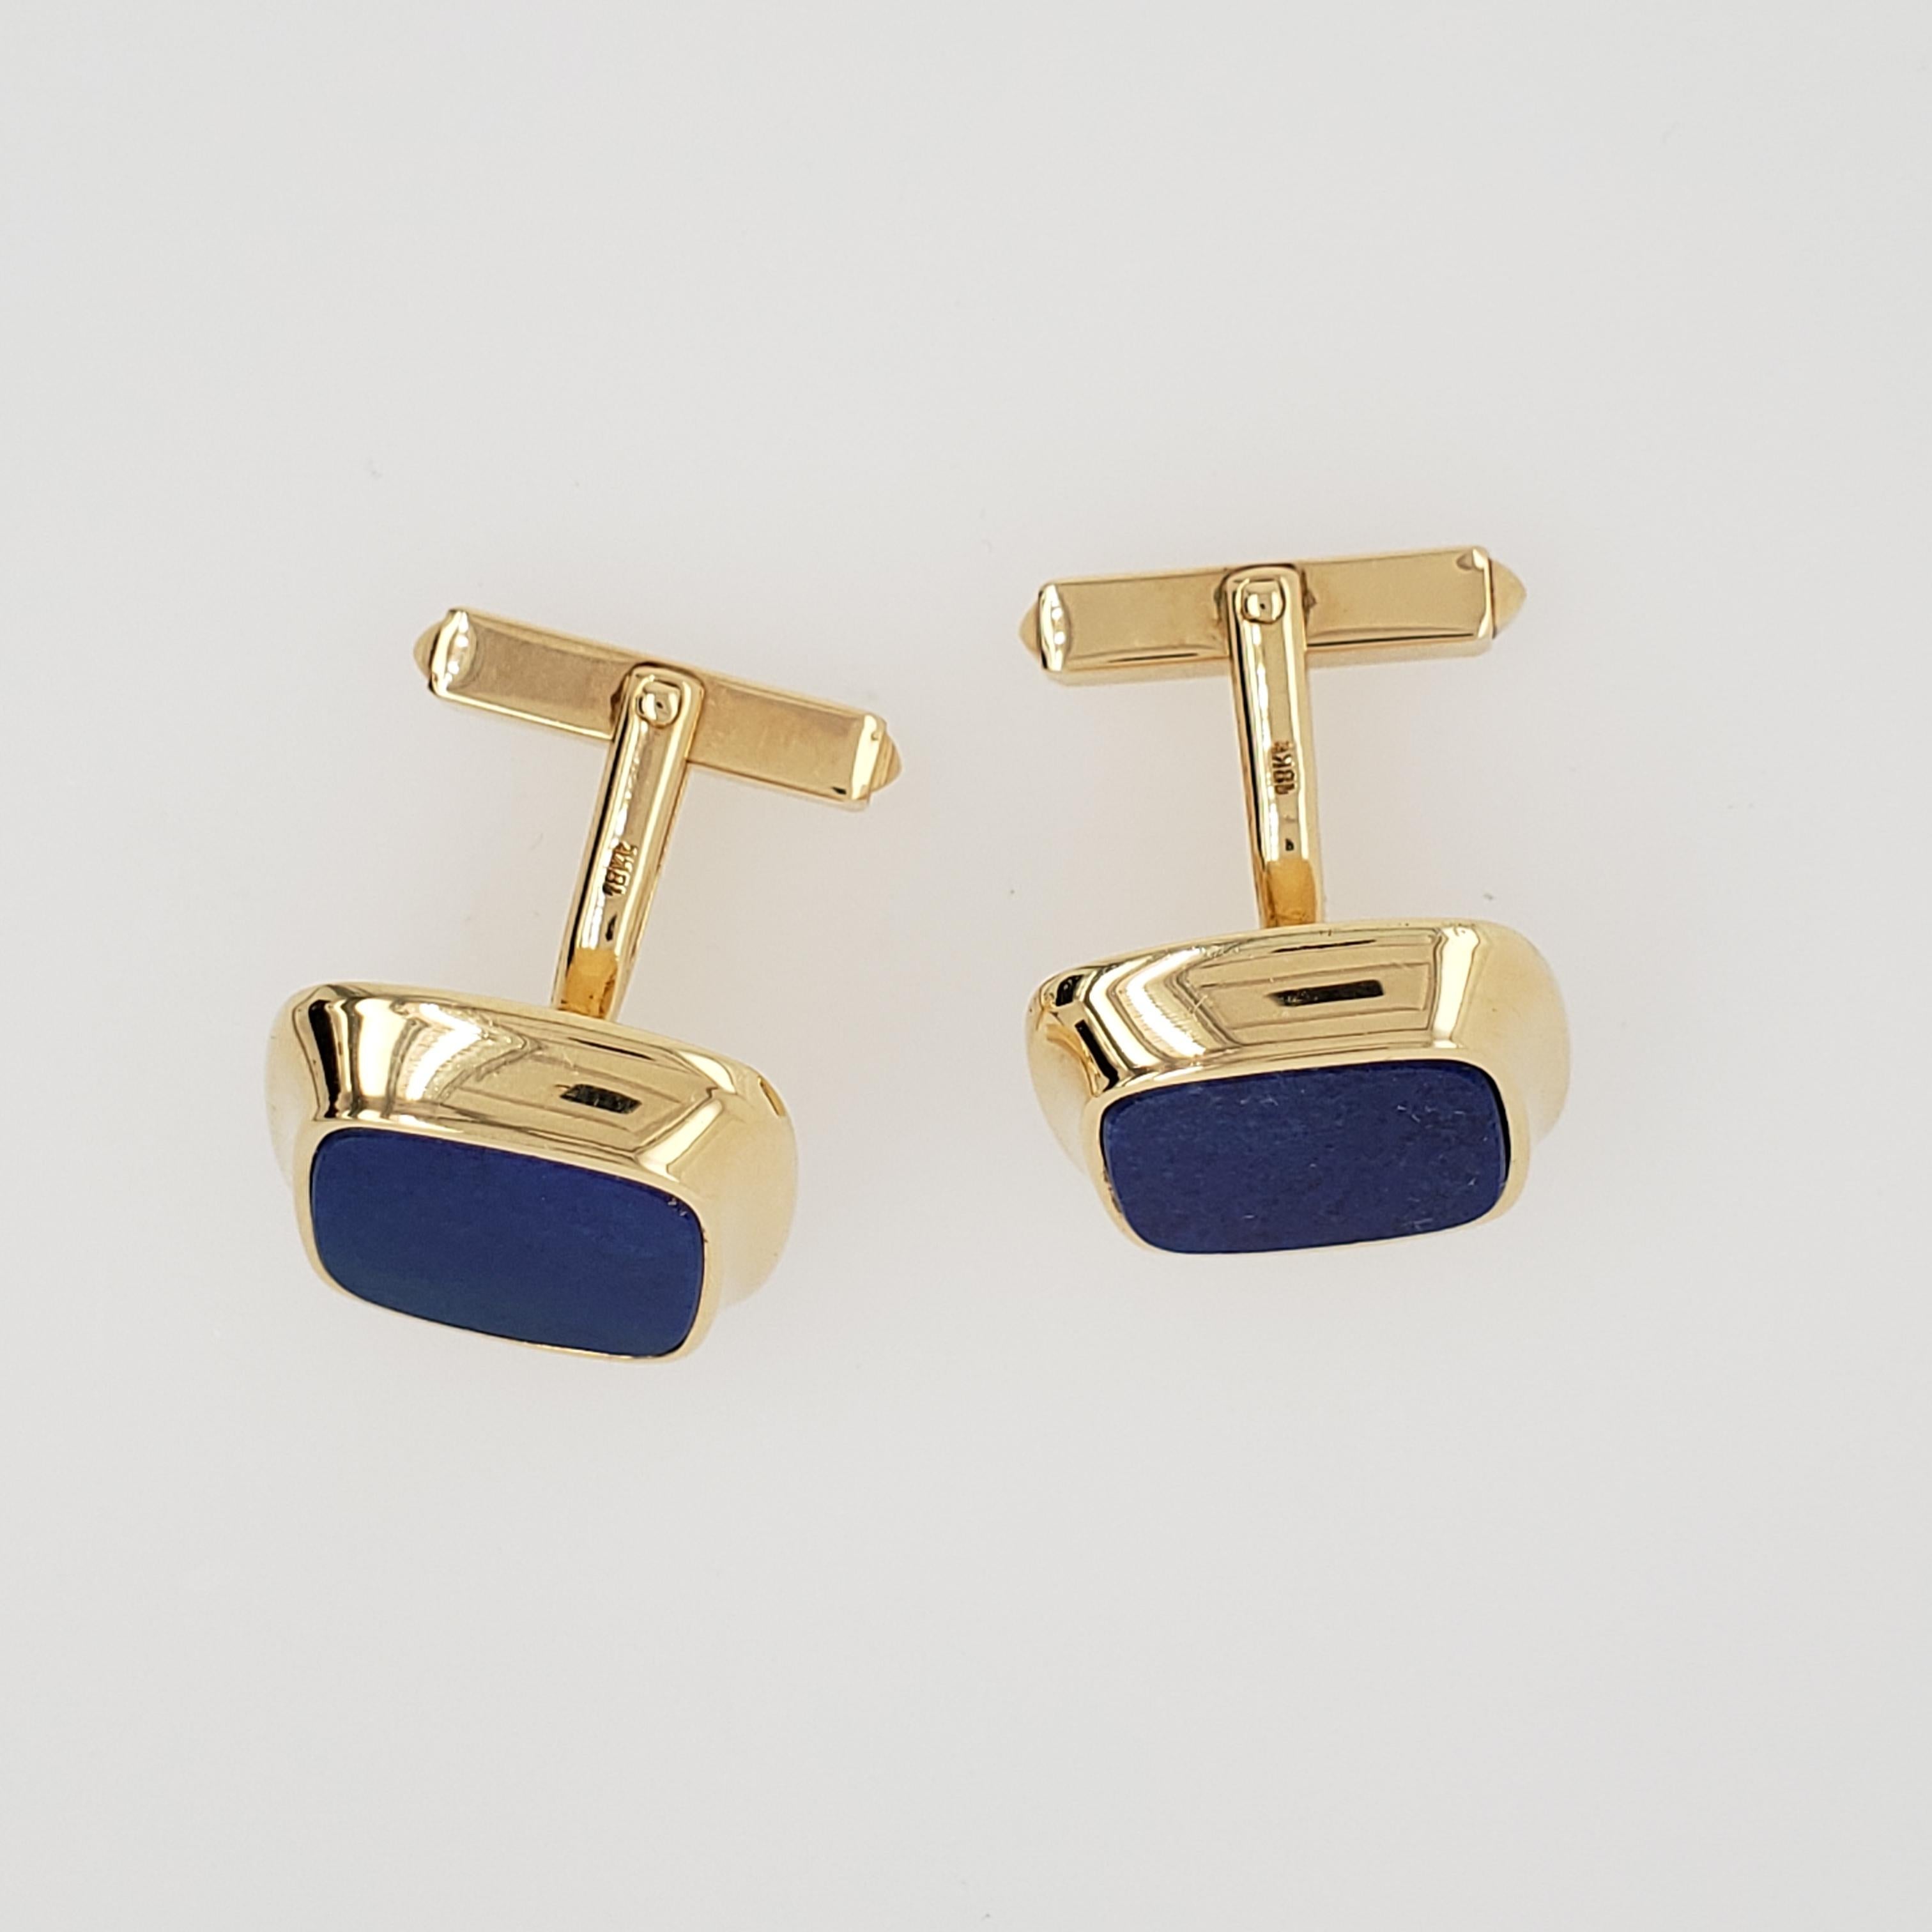 Vintage 18kt Yellow Gold Cartier Hallmarked Lapis Lazuli Cufflinks. The cufflinks are cushion cut in style. The cufflinks were made in Germany. Circa 1980's.